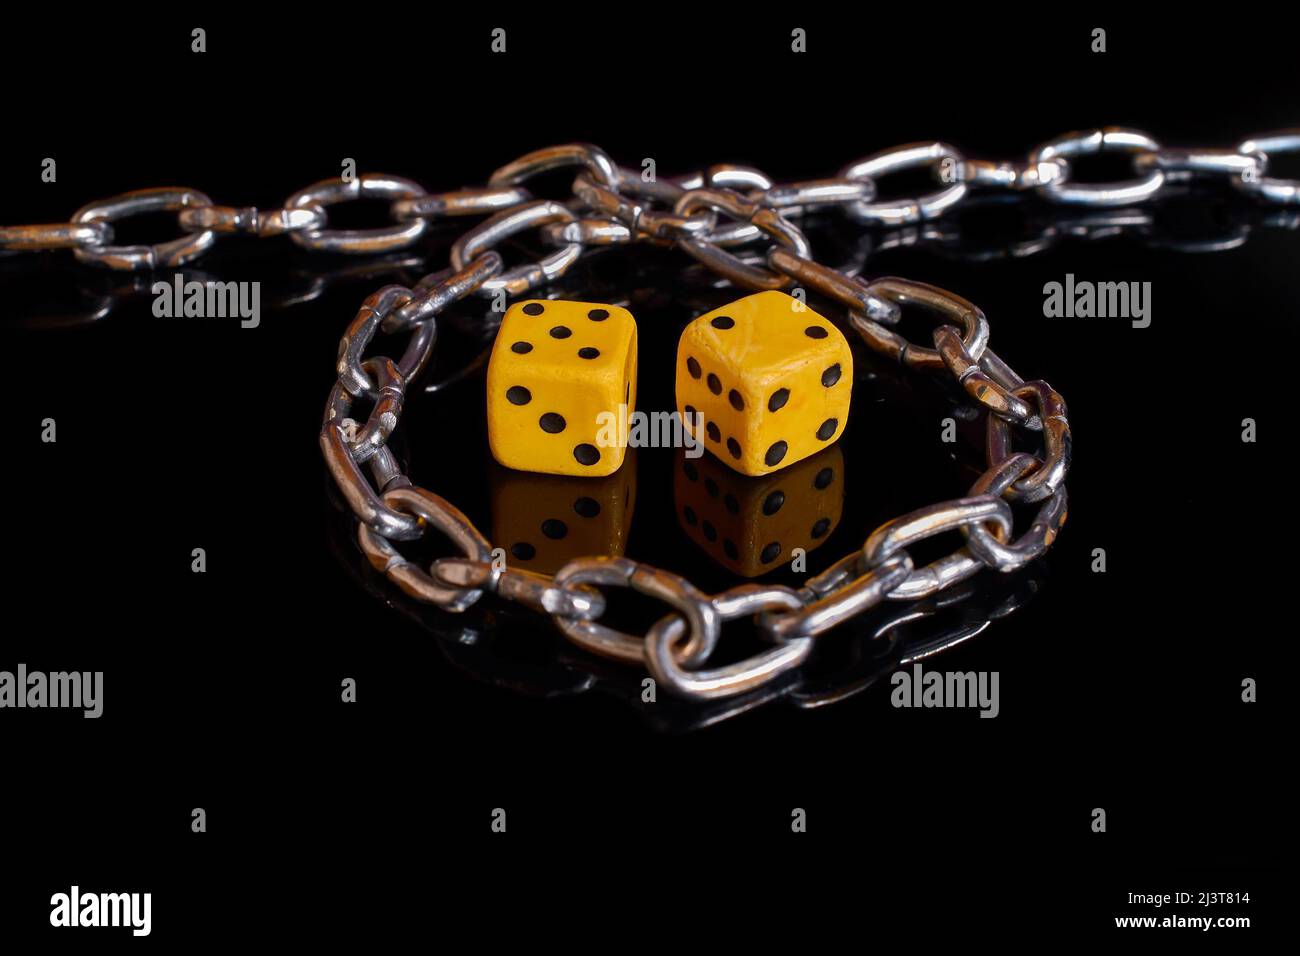 Gambling addiction. Two dice wrapped in a chain on a black background  Stock Photo